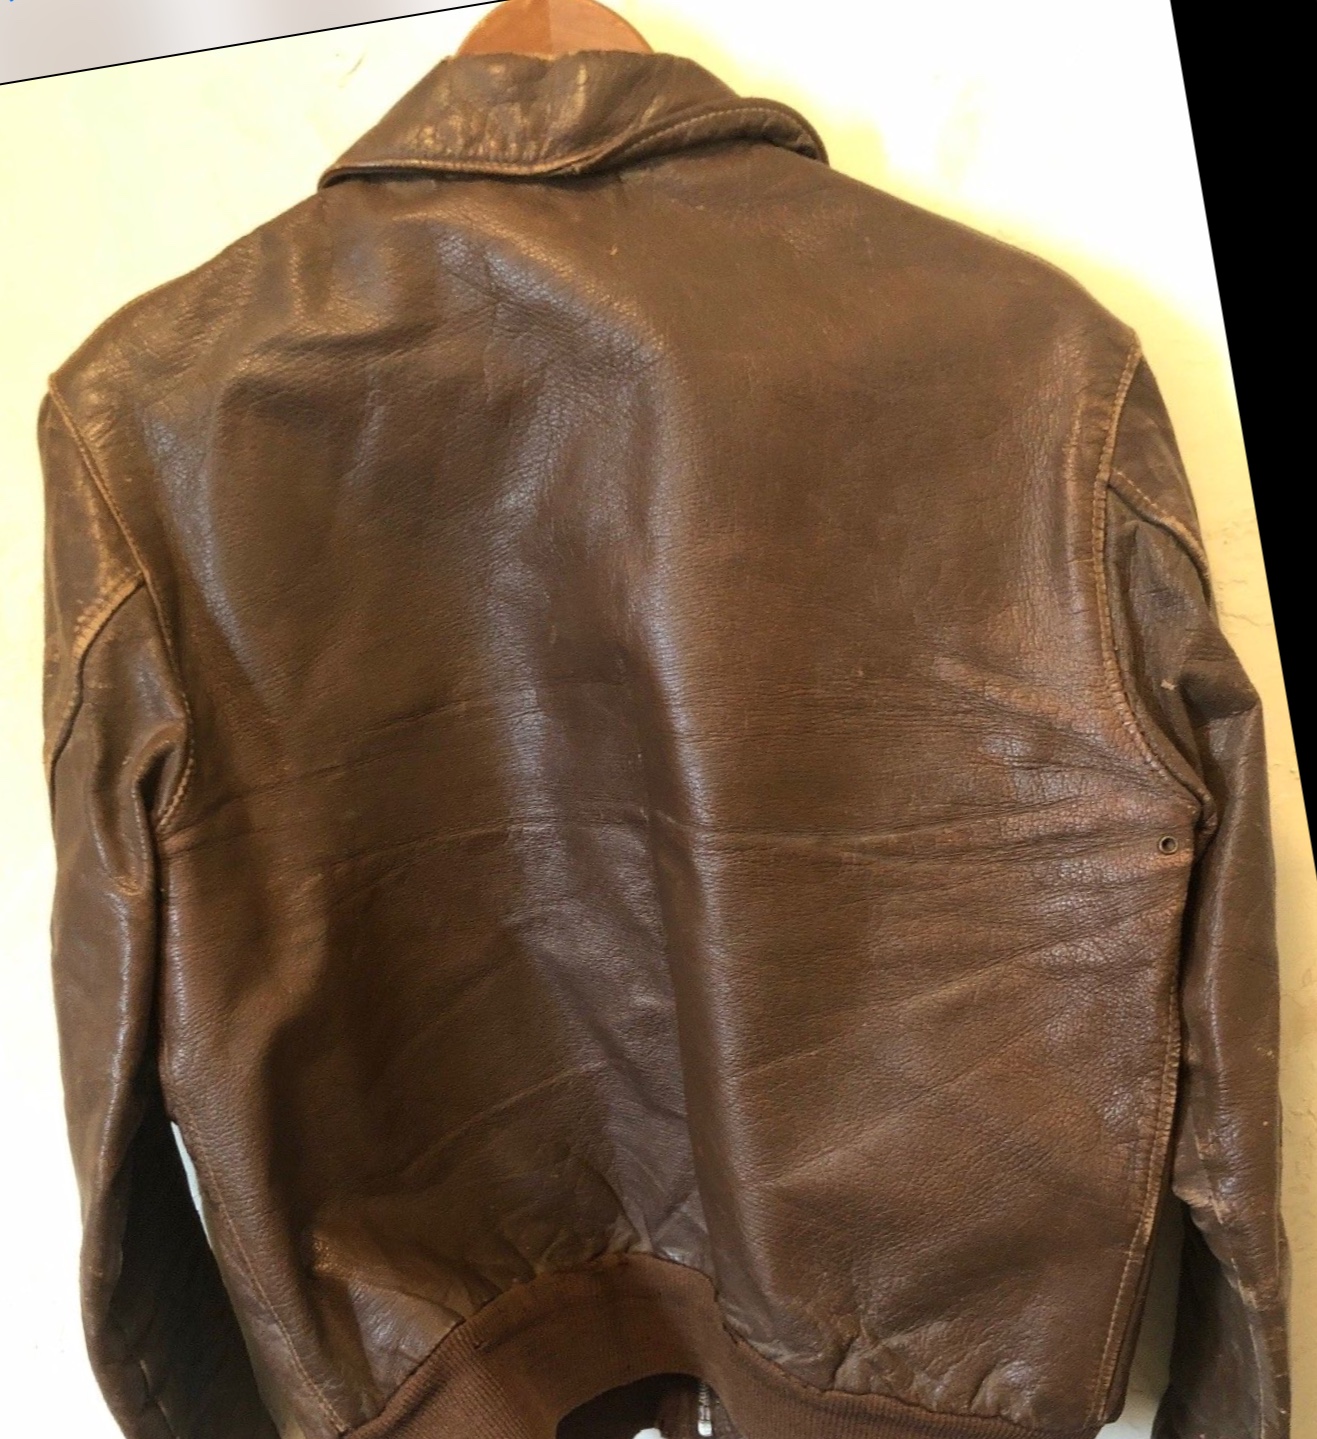 Monarch A-2 has arrived! | Page 2 | Vintage Leather Jackets Forum